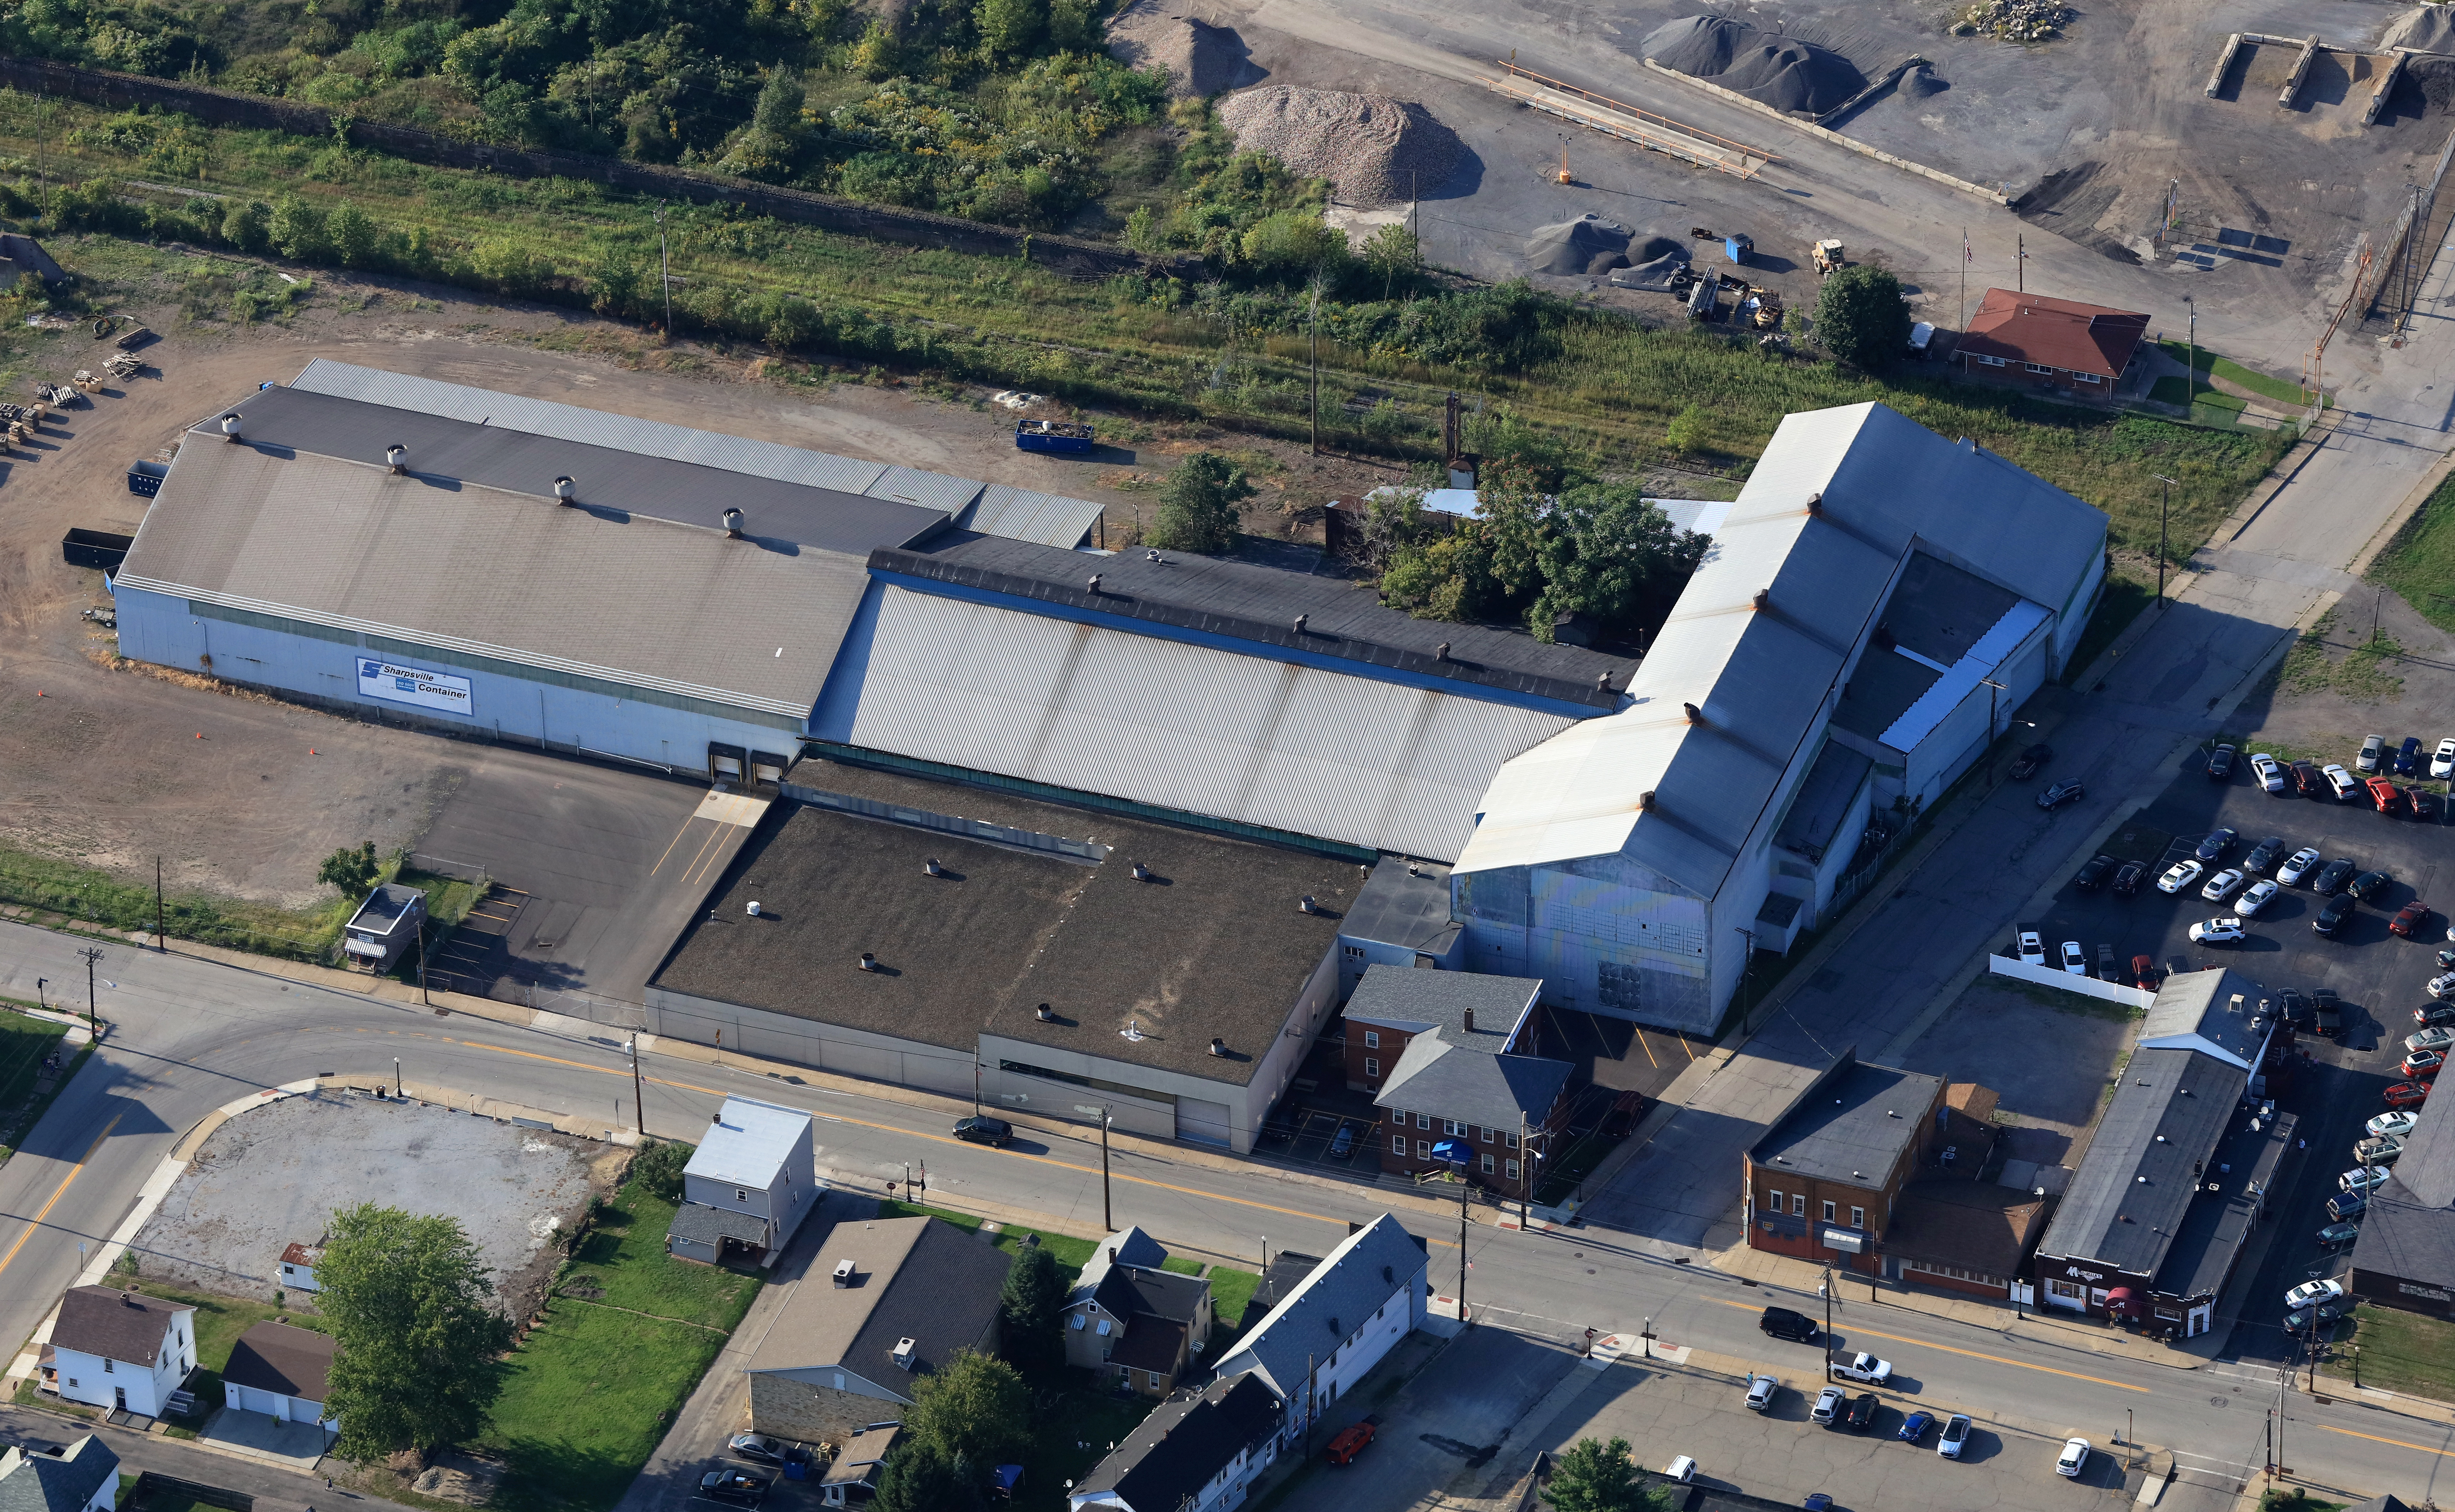 An aerial view of Sharpsville Container's facility in Sharpsville, PA